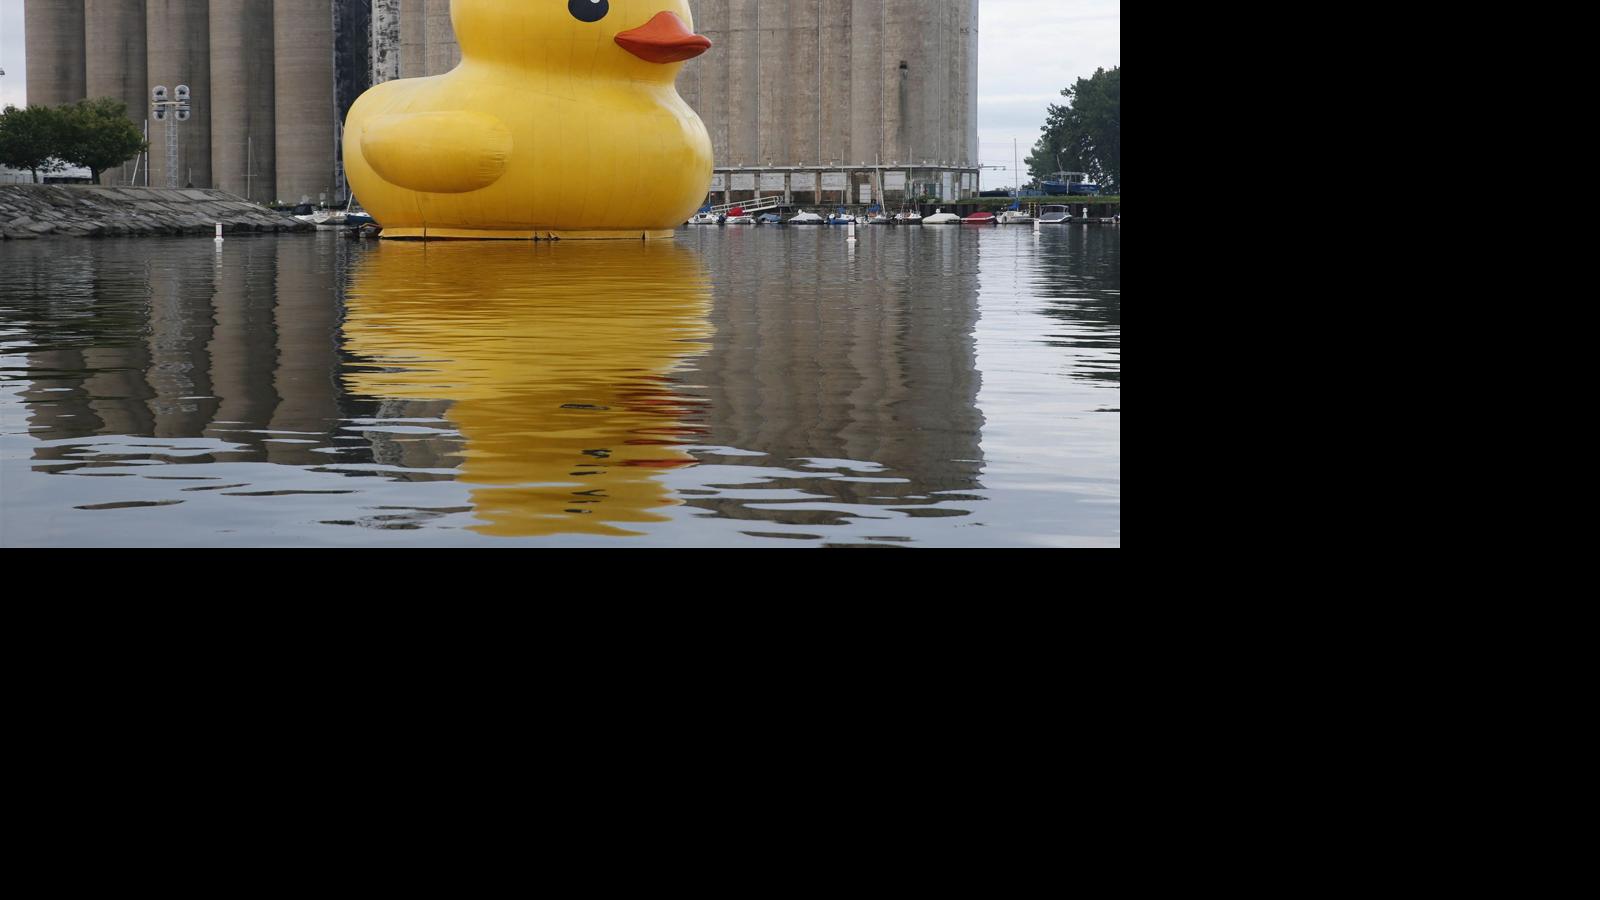 World's Largest Rubber Duck is now floating at Canalside Local News